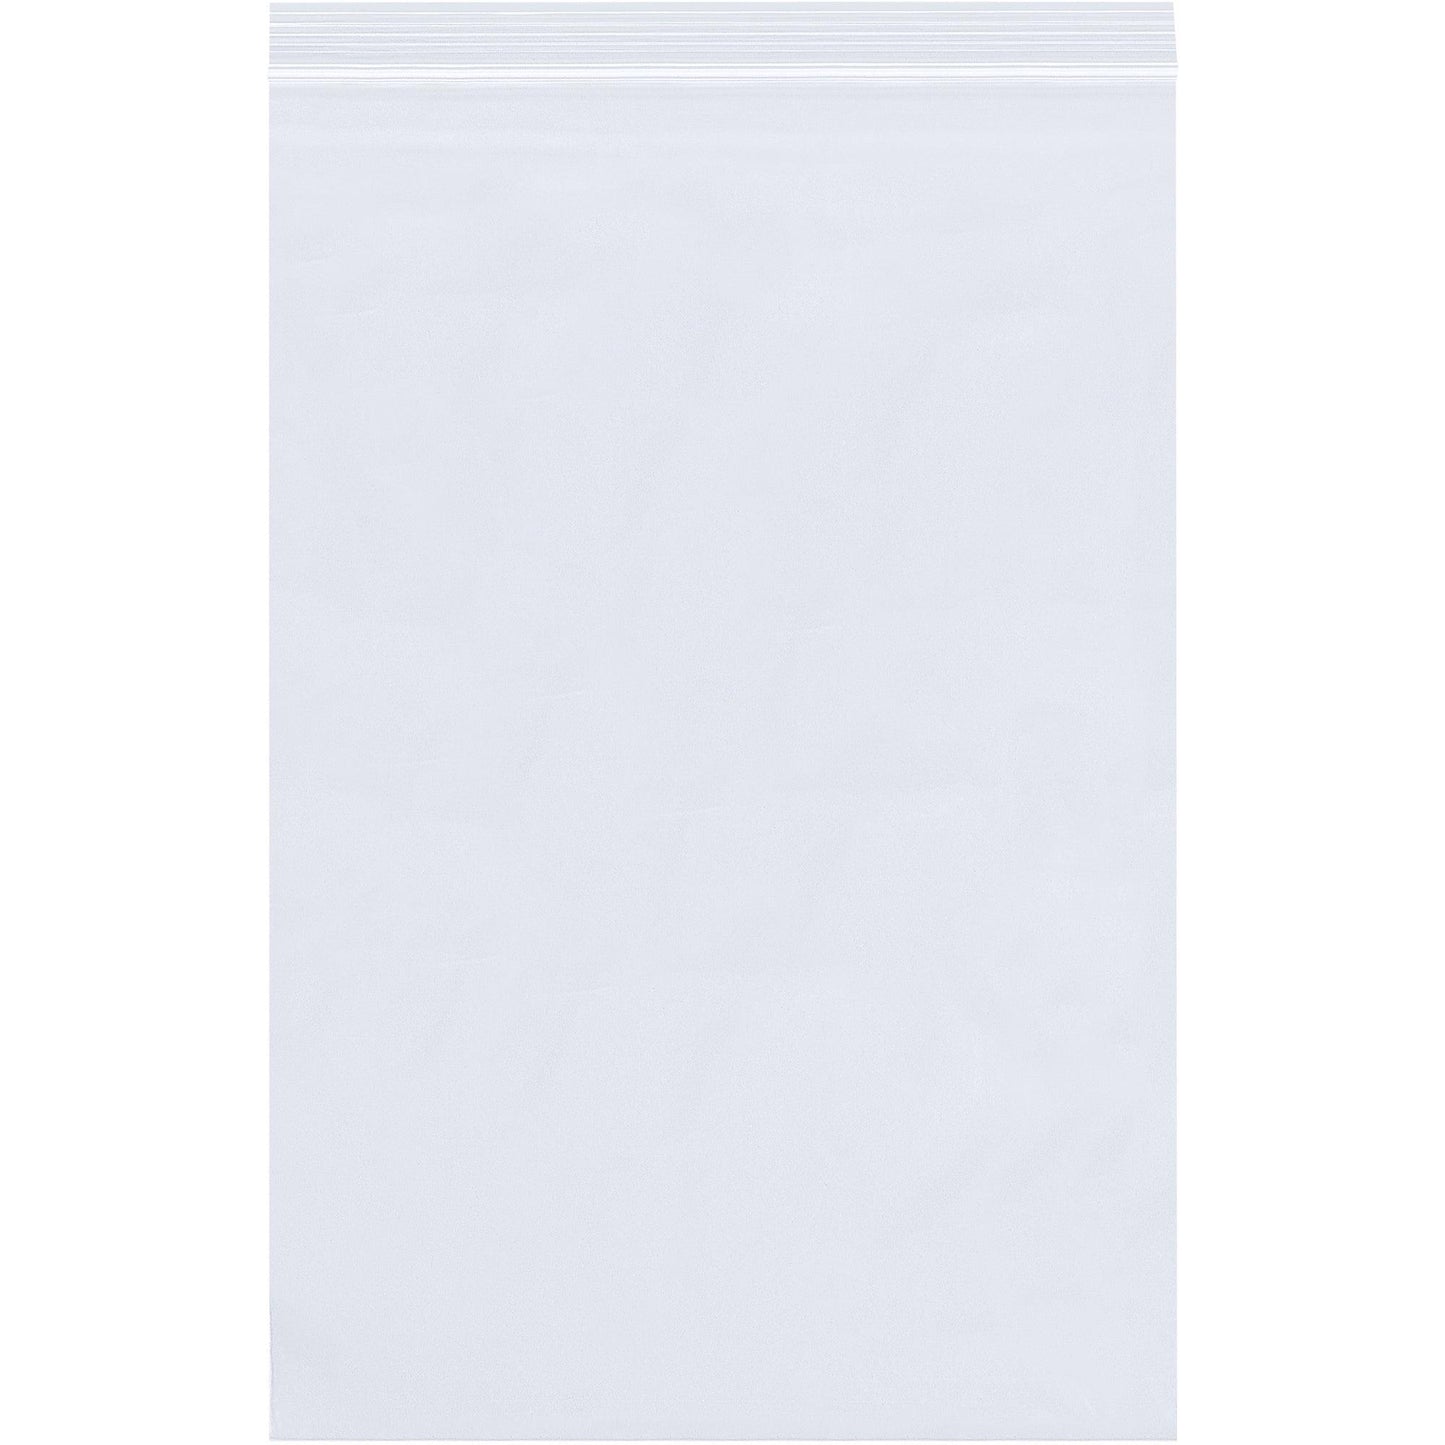 13 x 15" - 2 Mil Reclosable Poly Bags - PB3675